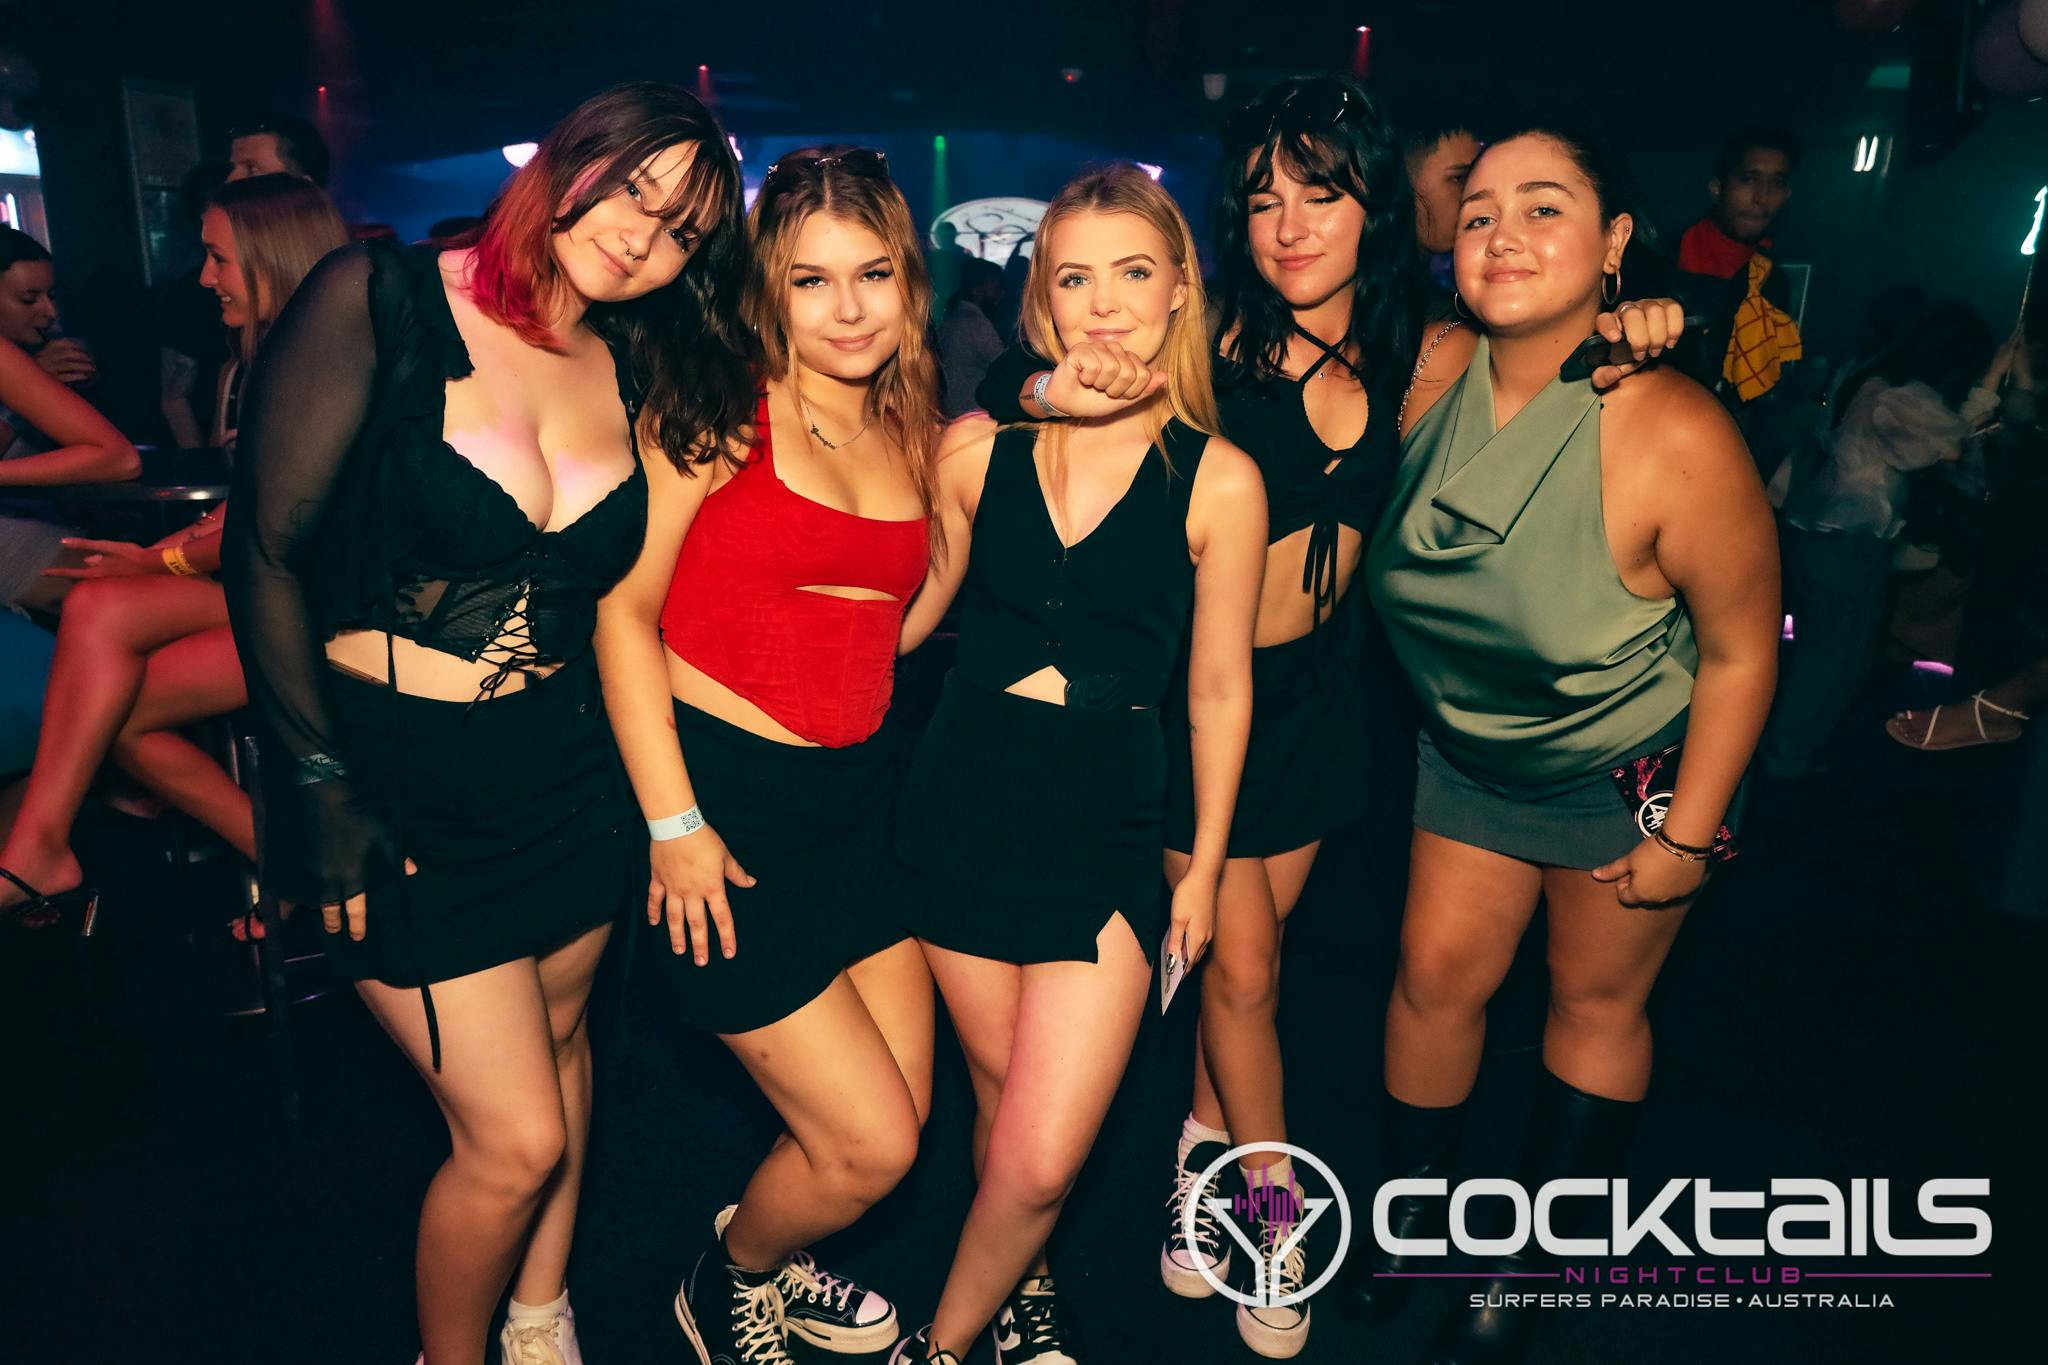 A professional photo of guests enjoying themselves at Cocktails Nightclub from our gallery.